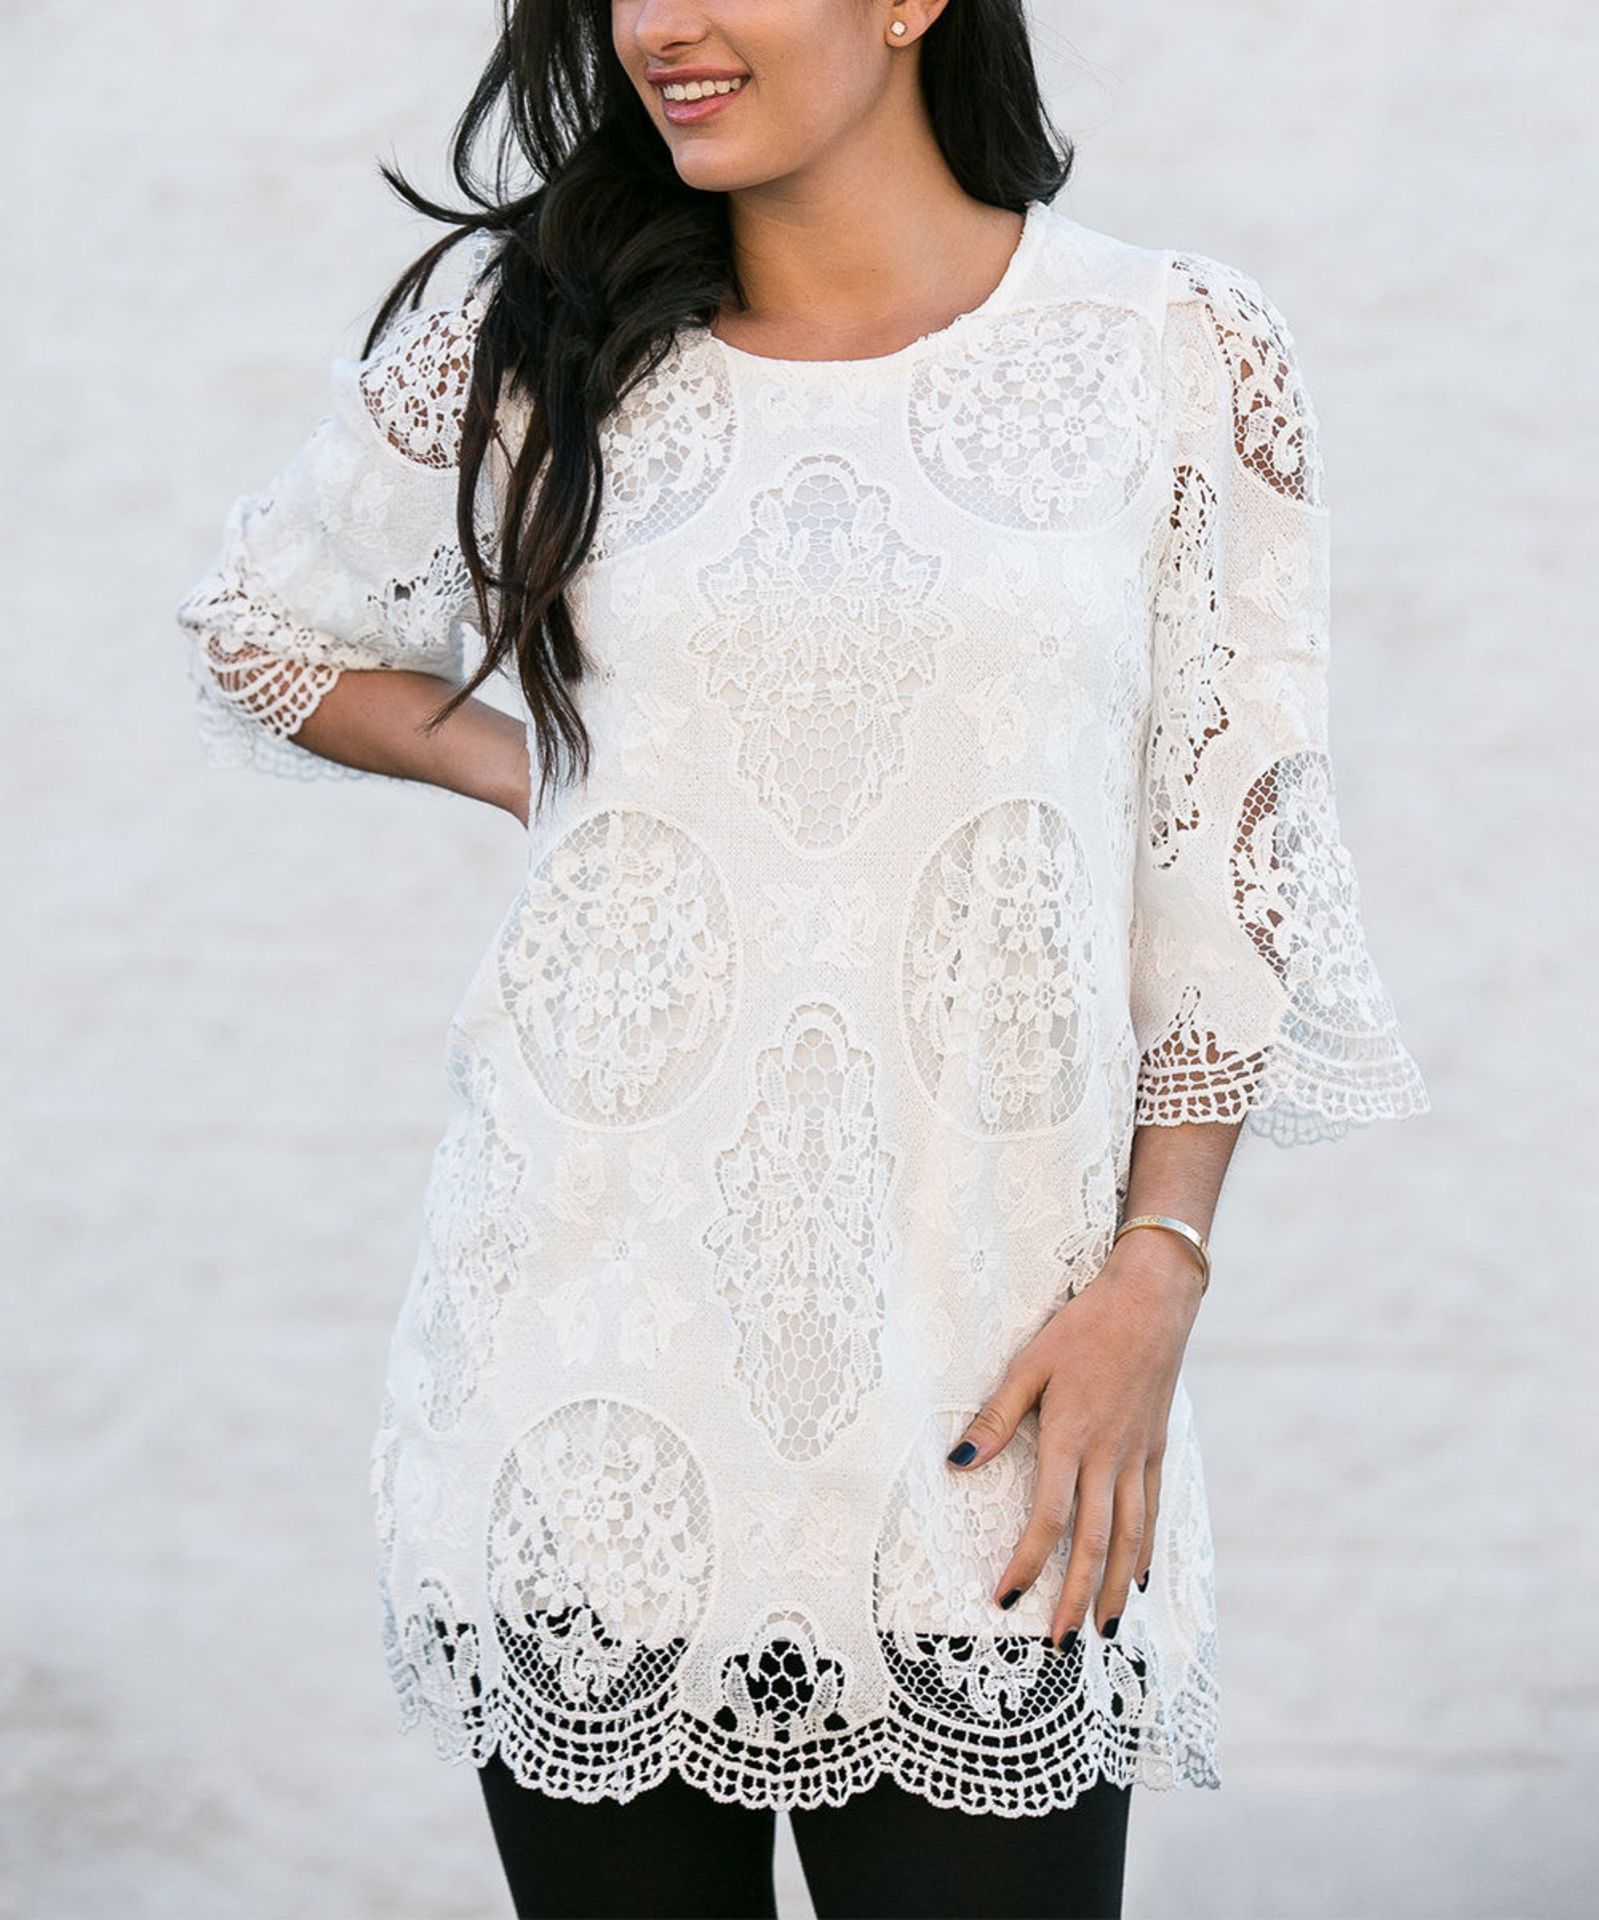 Brand New Simply Couture White Lace Three-Quarter Sleeve Tunic (UK 12) (Ref: 37634202 CD Bag 12)